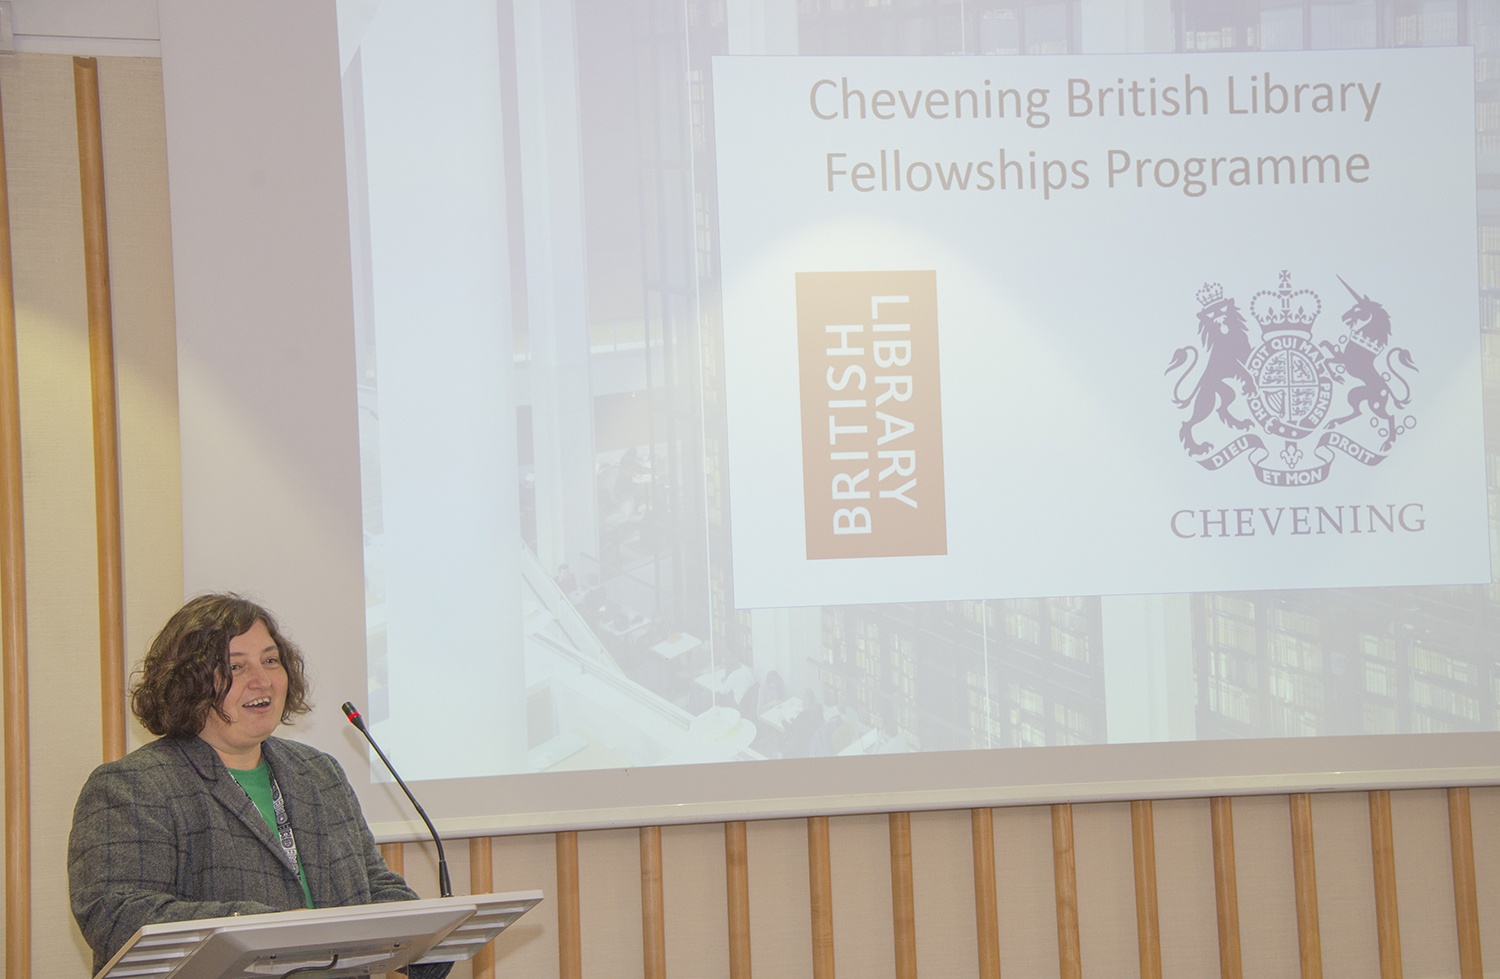 Maja Maricevic addresses the audience about the British Library Fellowship